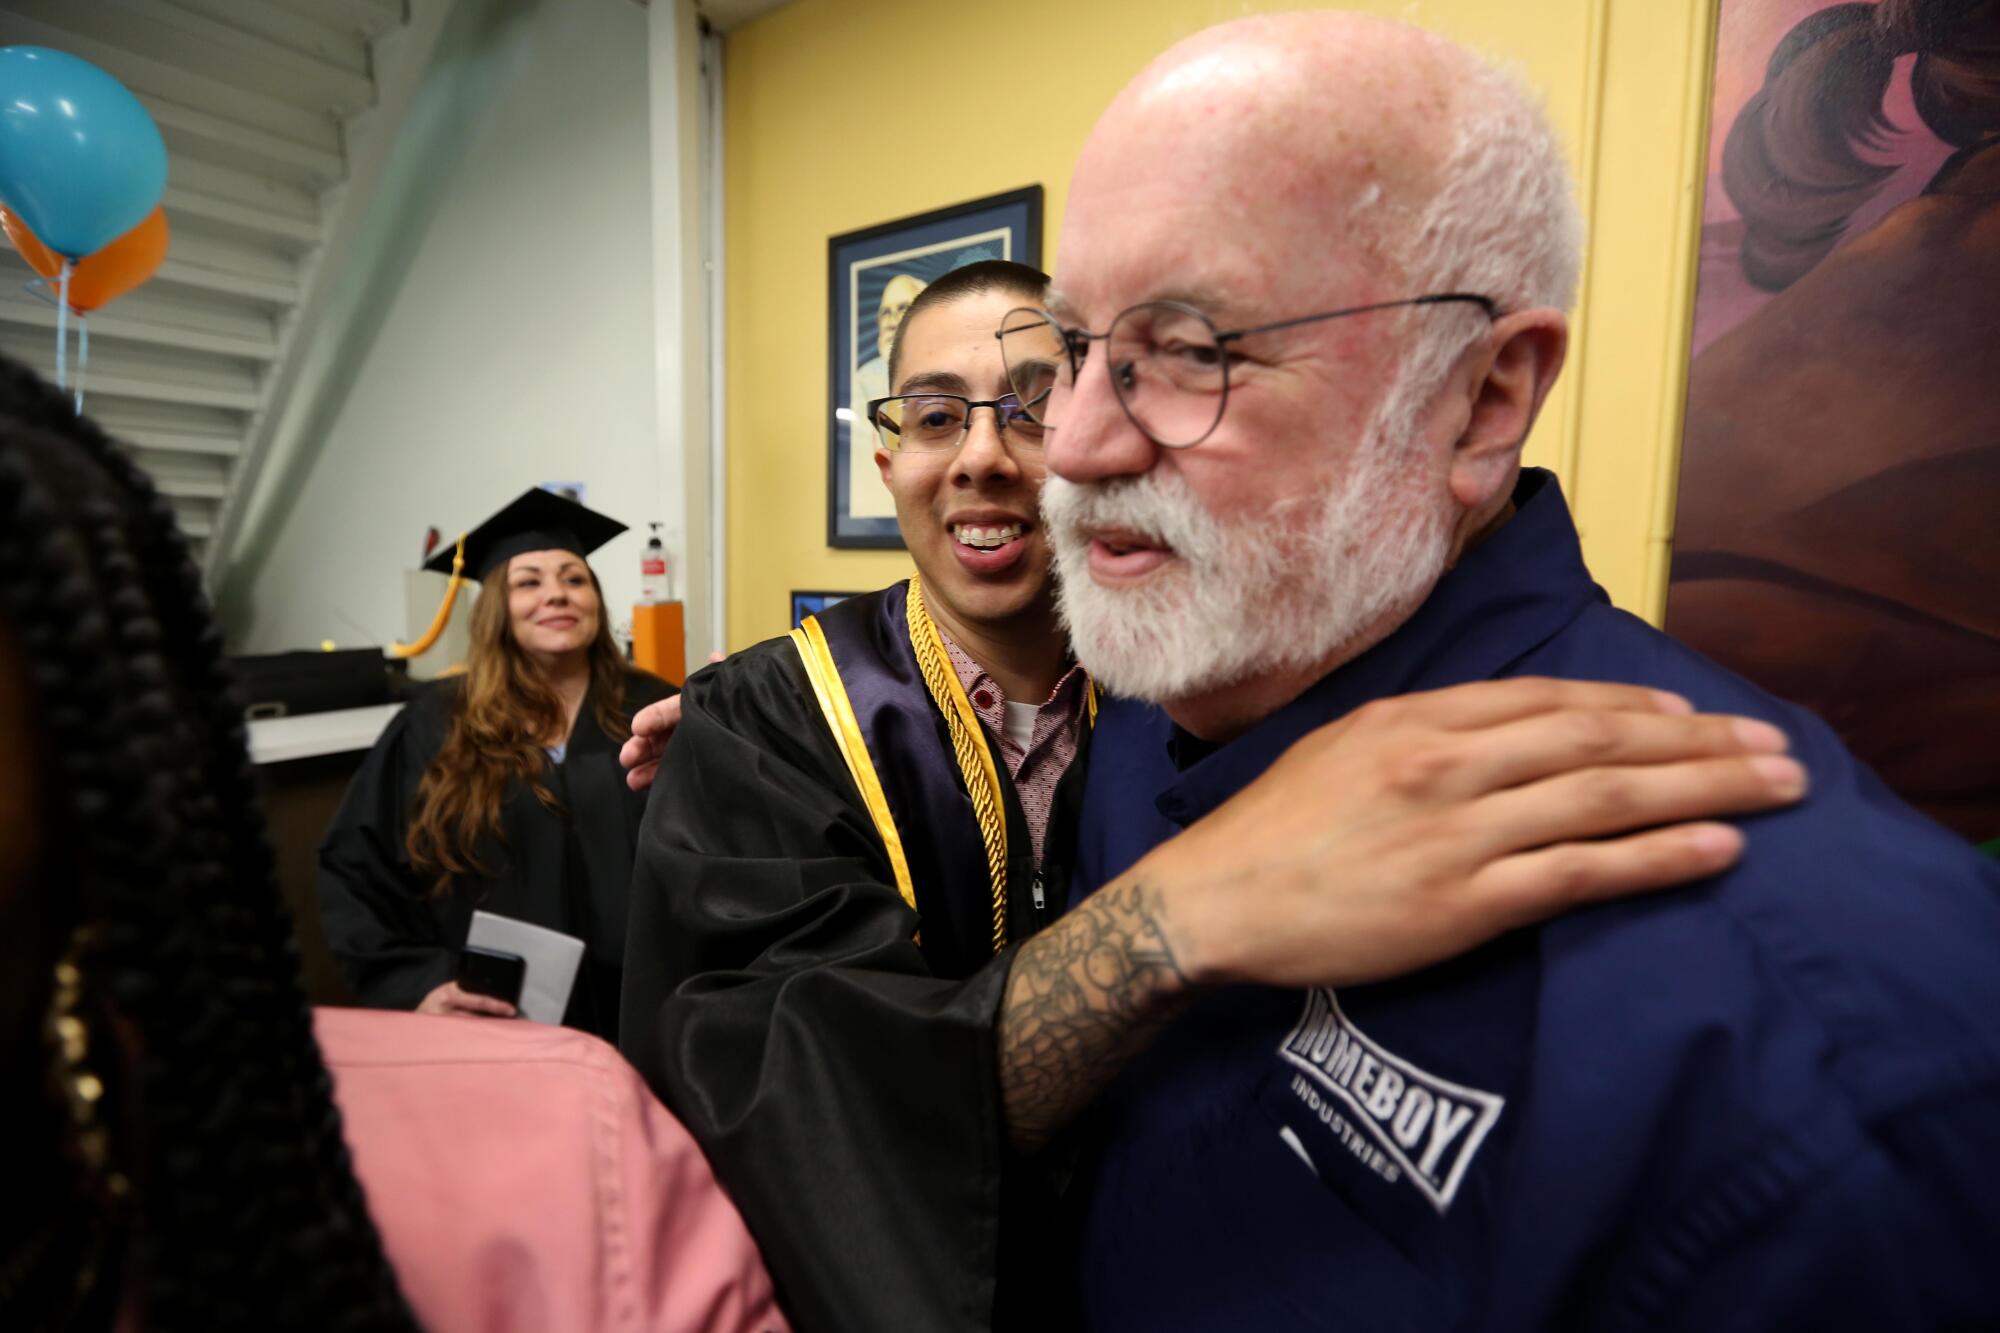 A young man in a graduation gown embraces an older man.